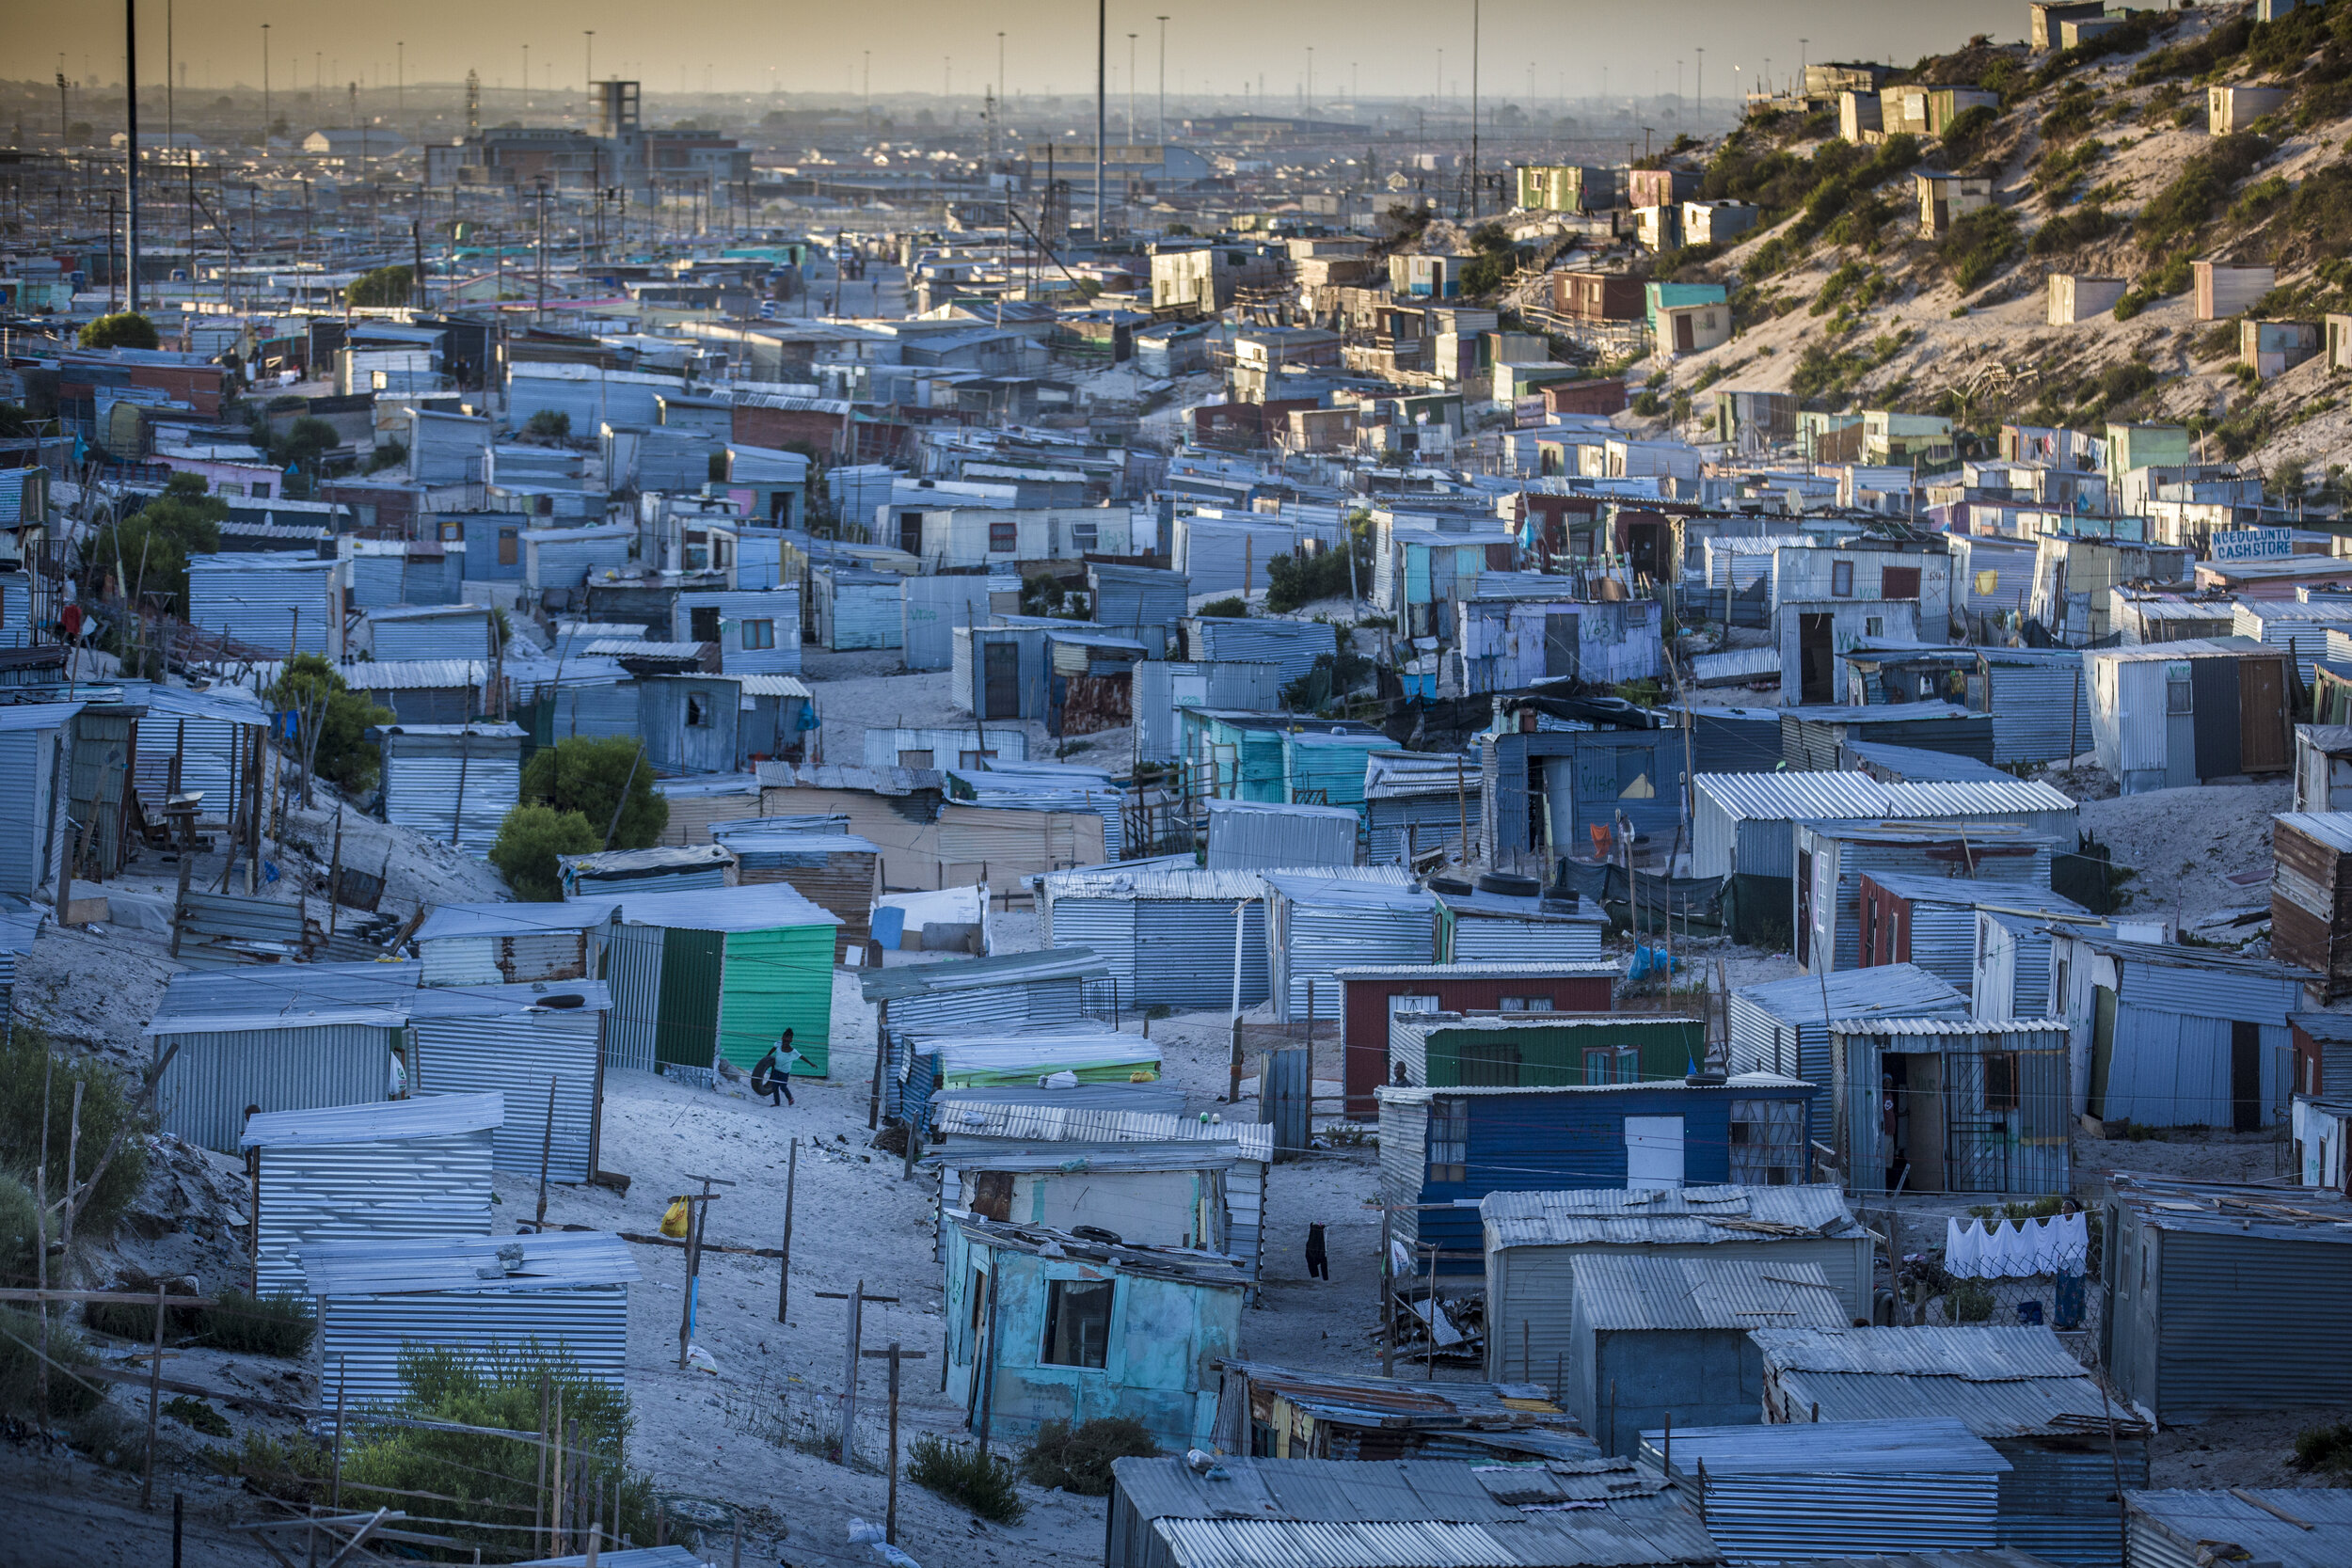  The slum area of Khayelitsha is home to approximately 2.4 million inhabitants, Cape Town / South Africa - 2019 